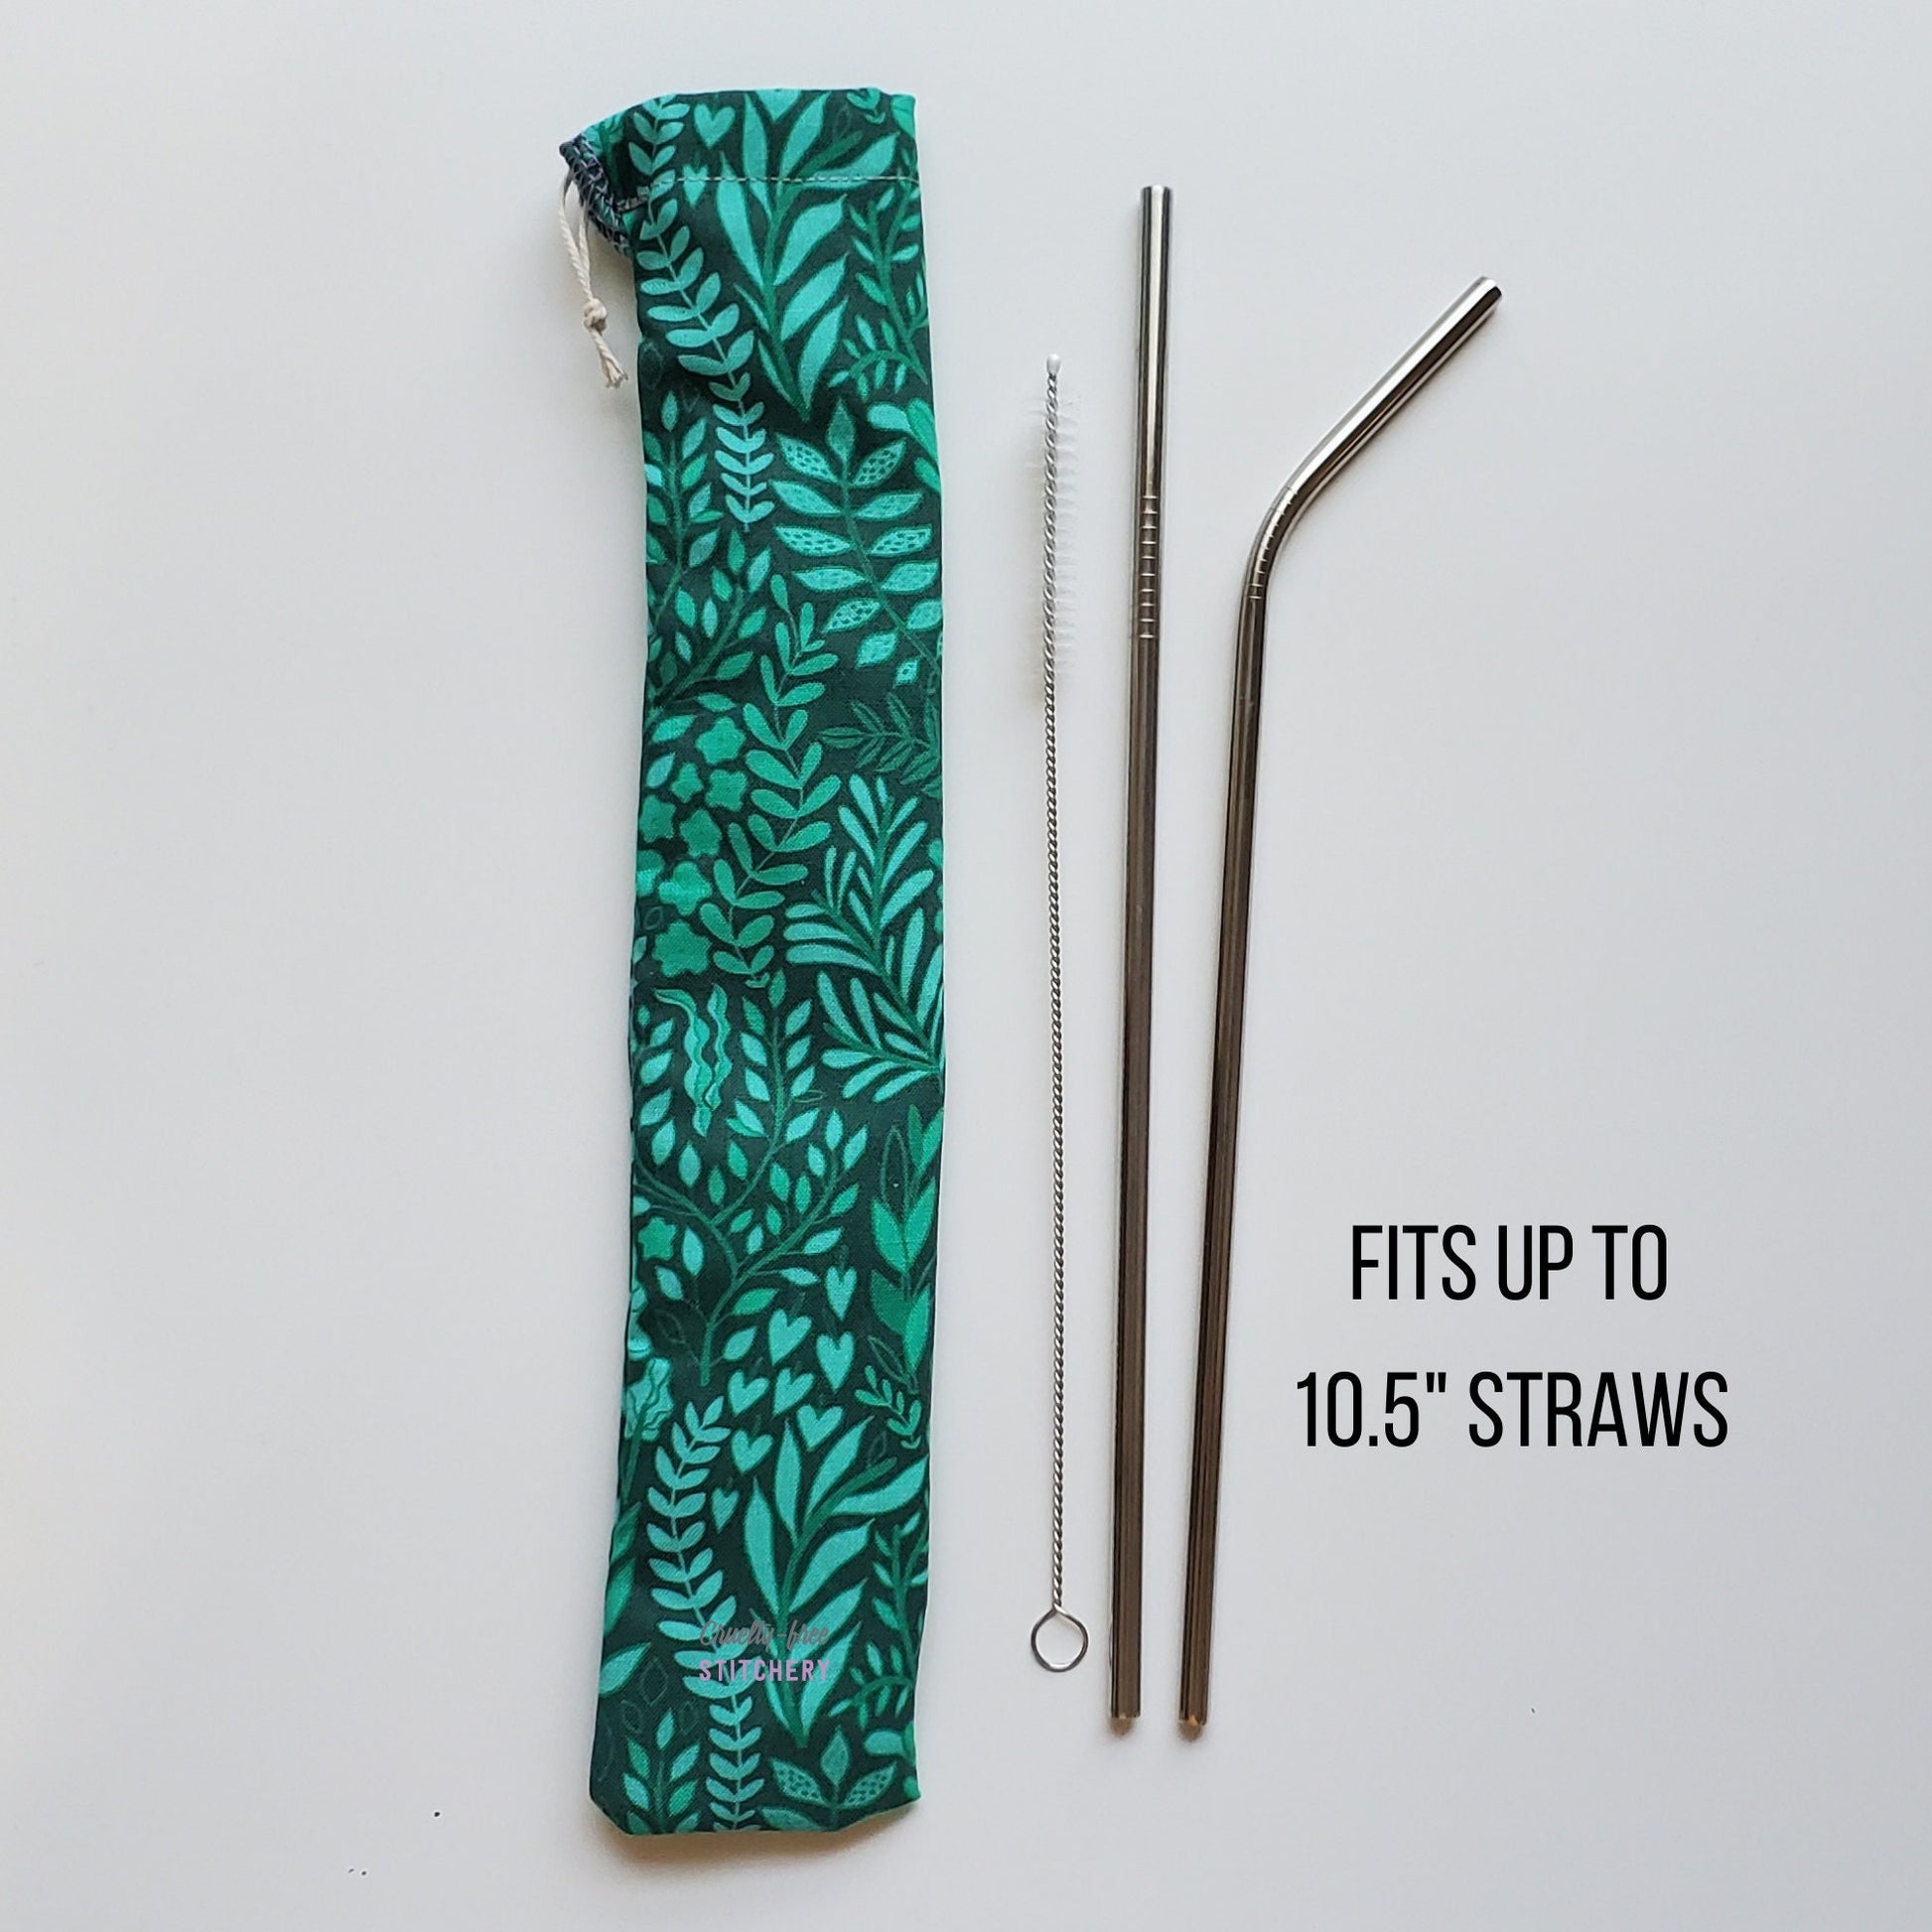 Reusable straw pouch in the same green with leaves print laying vertically next to a straw cleaner brush, a straight stainless steel straw, and a bent stainless steel straw. Text reads &quot;fits up to 10.5 inch straws&quot;